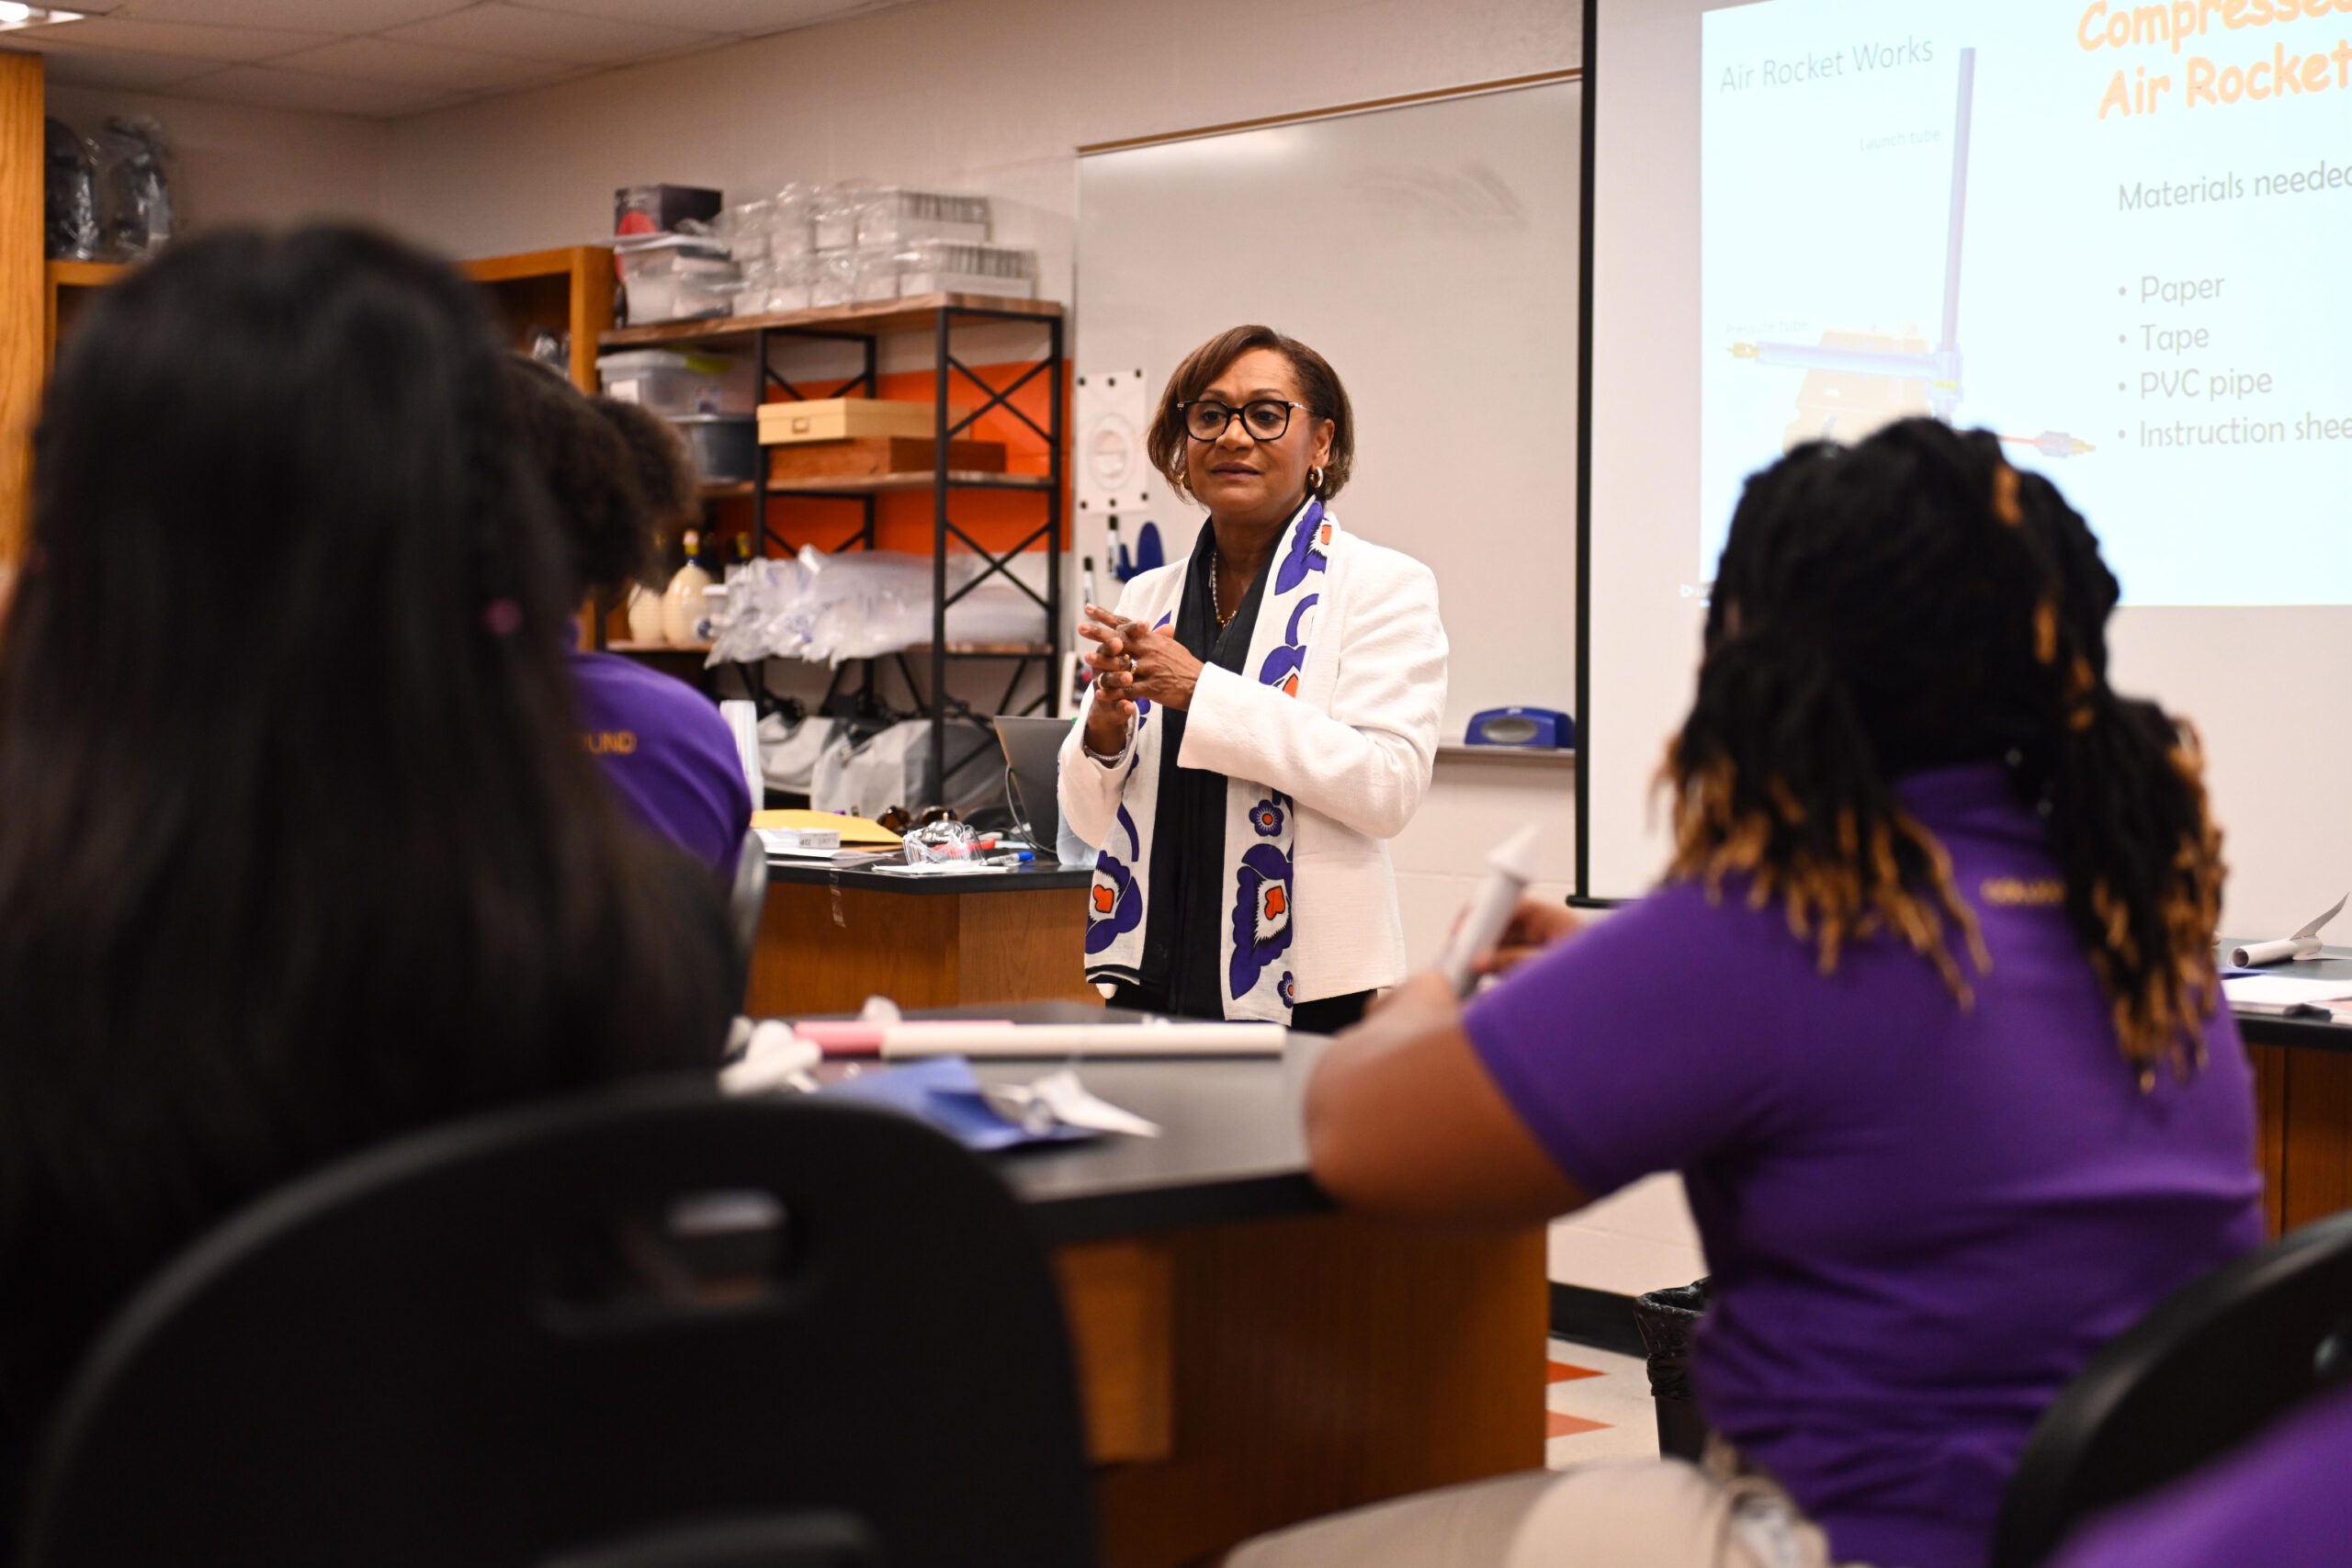 A Black woman stands in front of two seated Black female students, both wearing purple shirts, and she is presenting something to them inside a classroom laboratory.